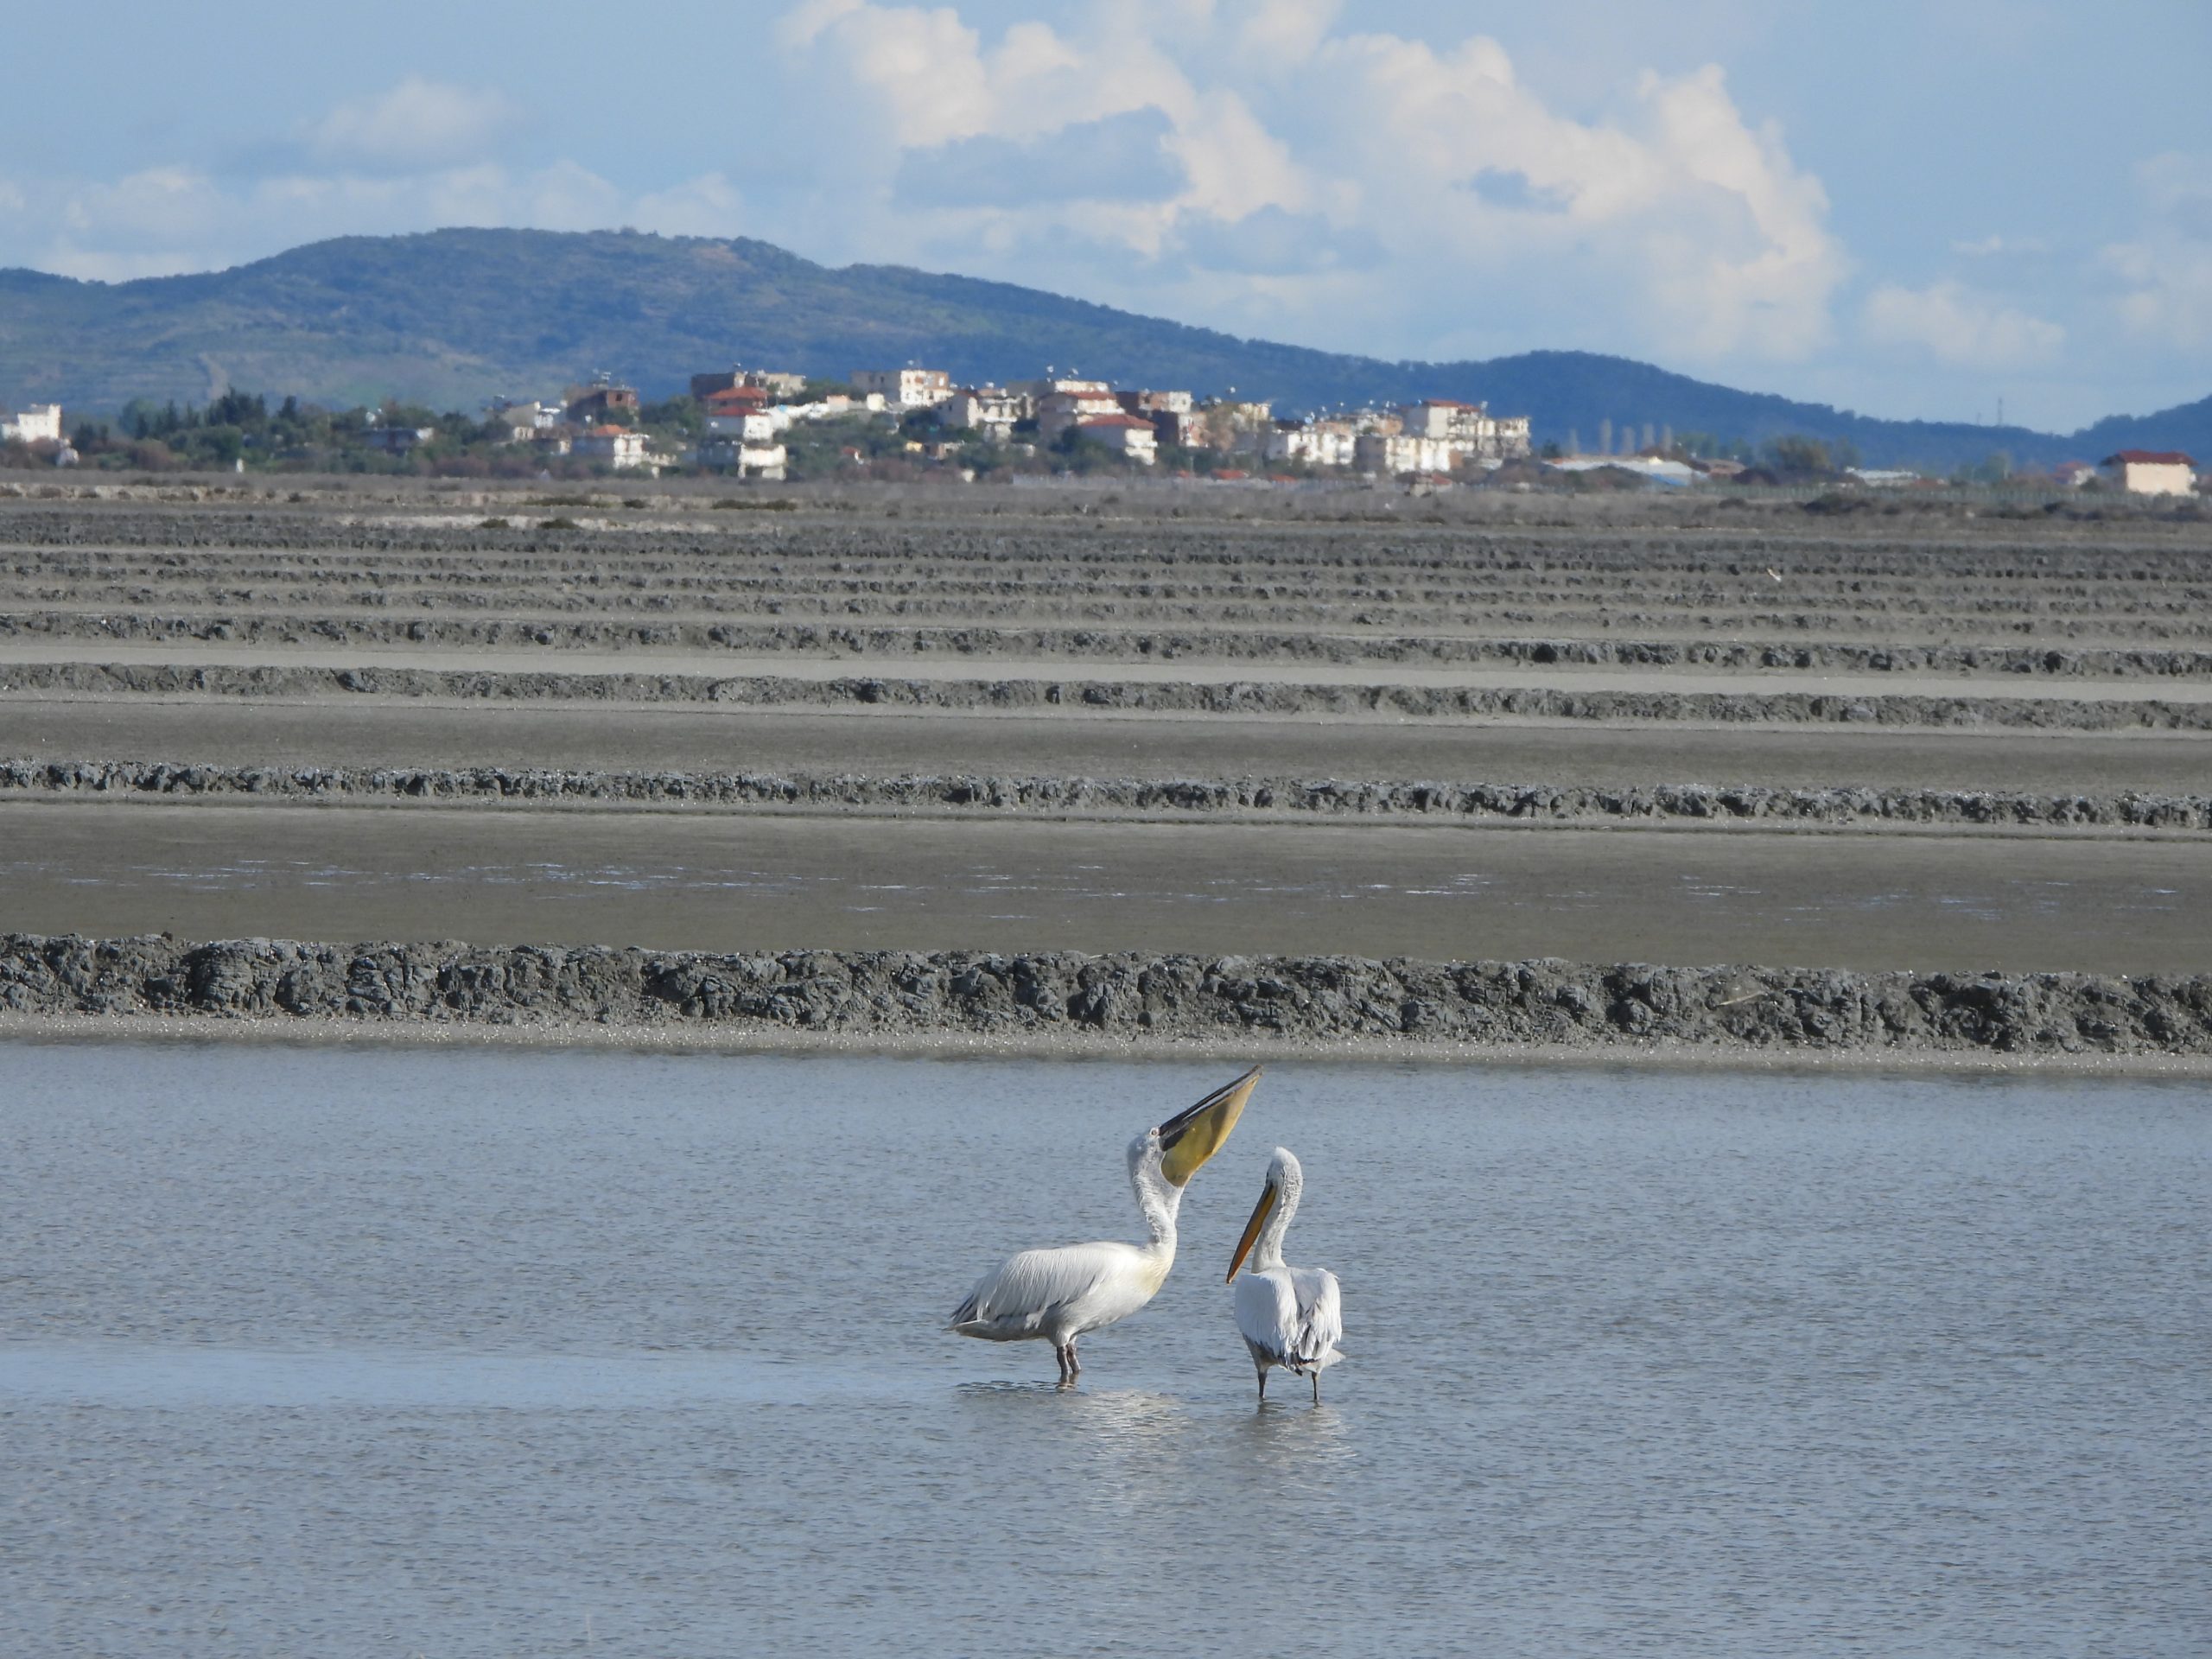 Vlora airport: International community calls for a viable solution to save the natural paradise of Vjosa- Narta Lagoon in Albania